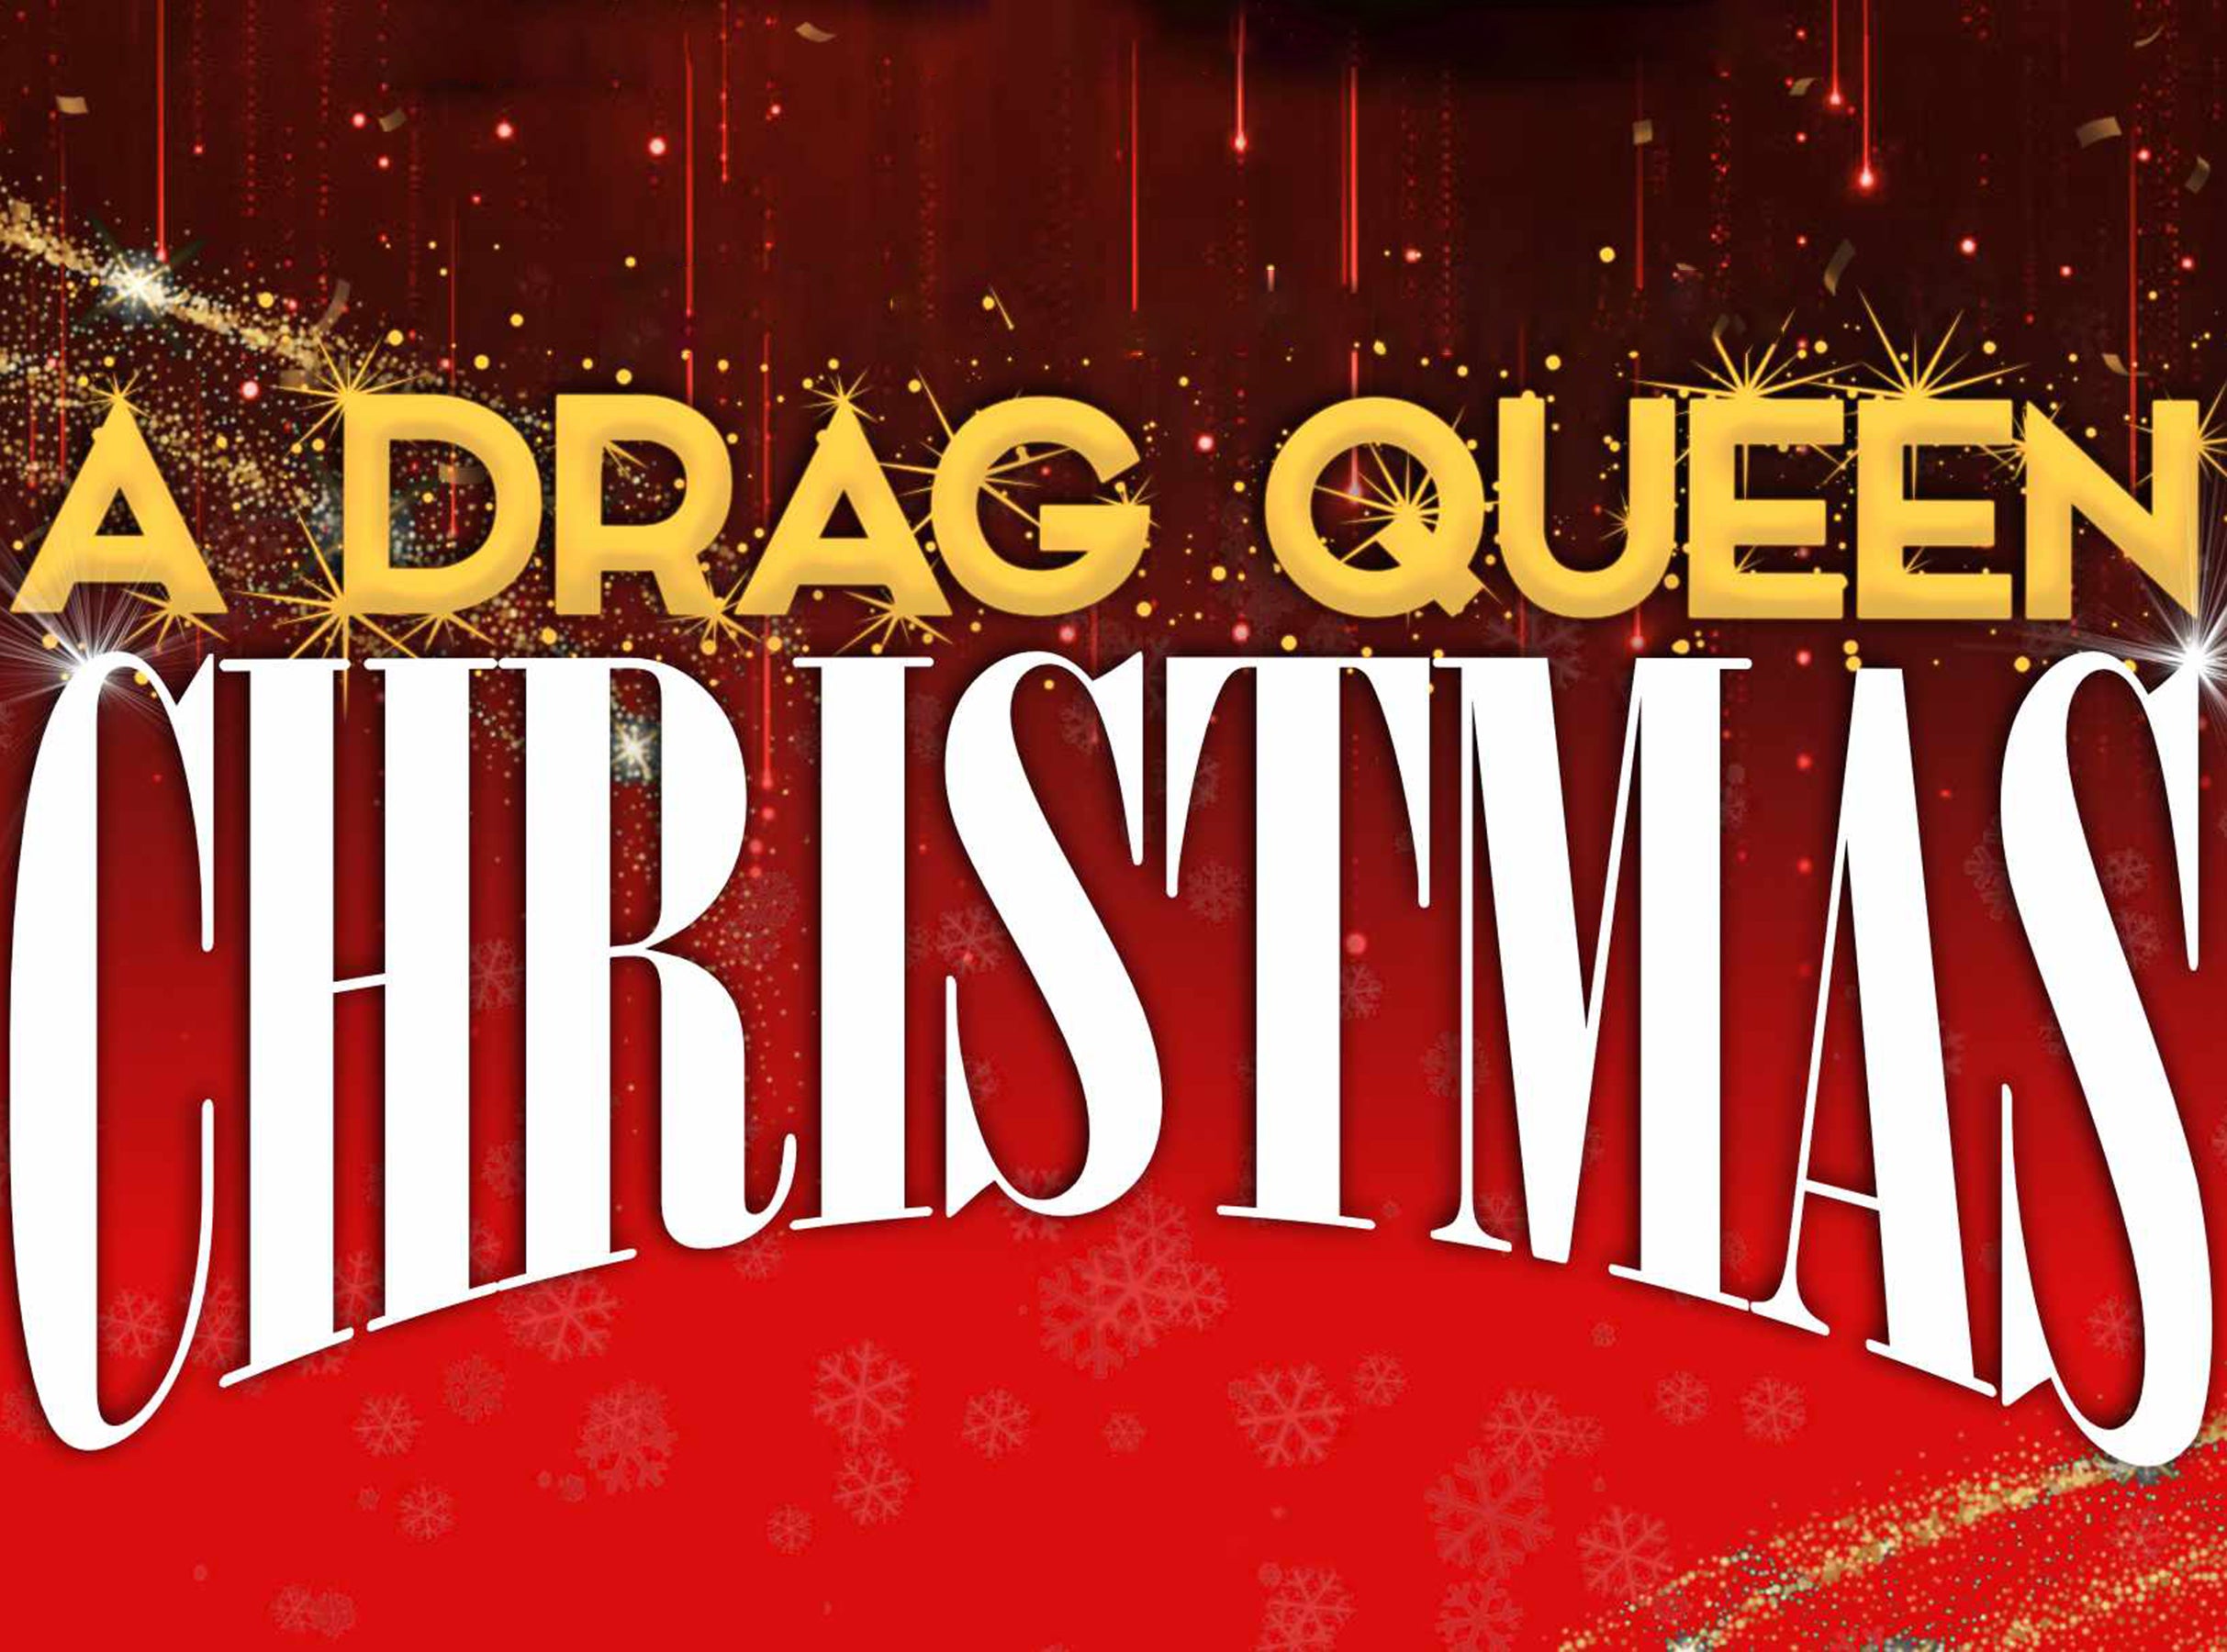 accurate presale password for A Drag Queen Christmas advanced tickets in Knoxville